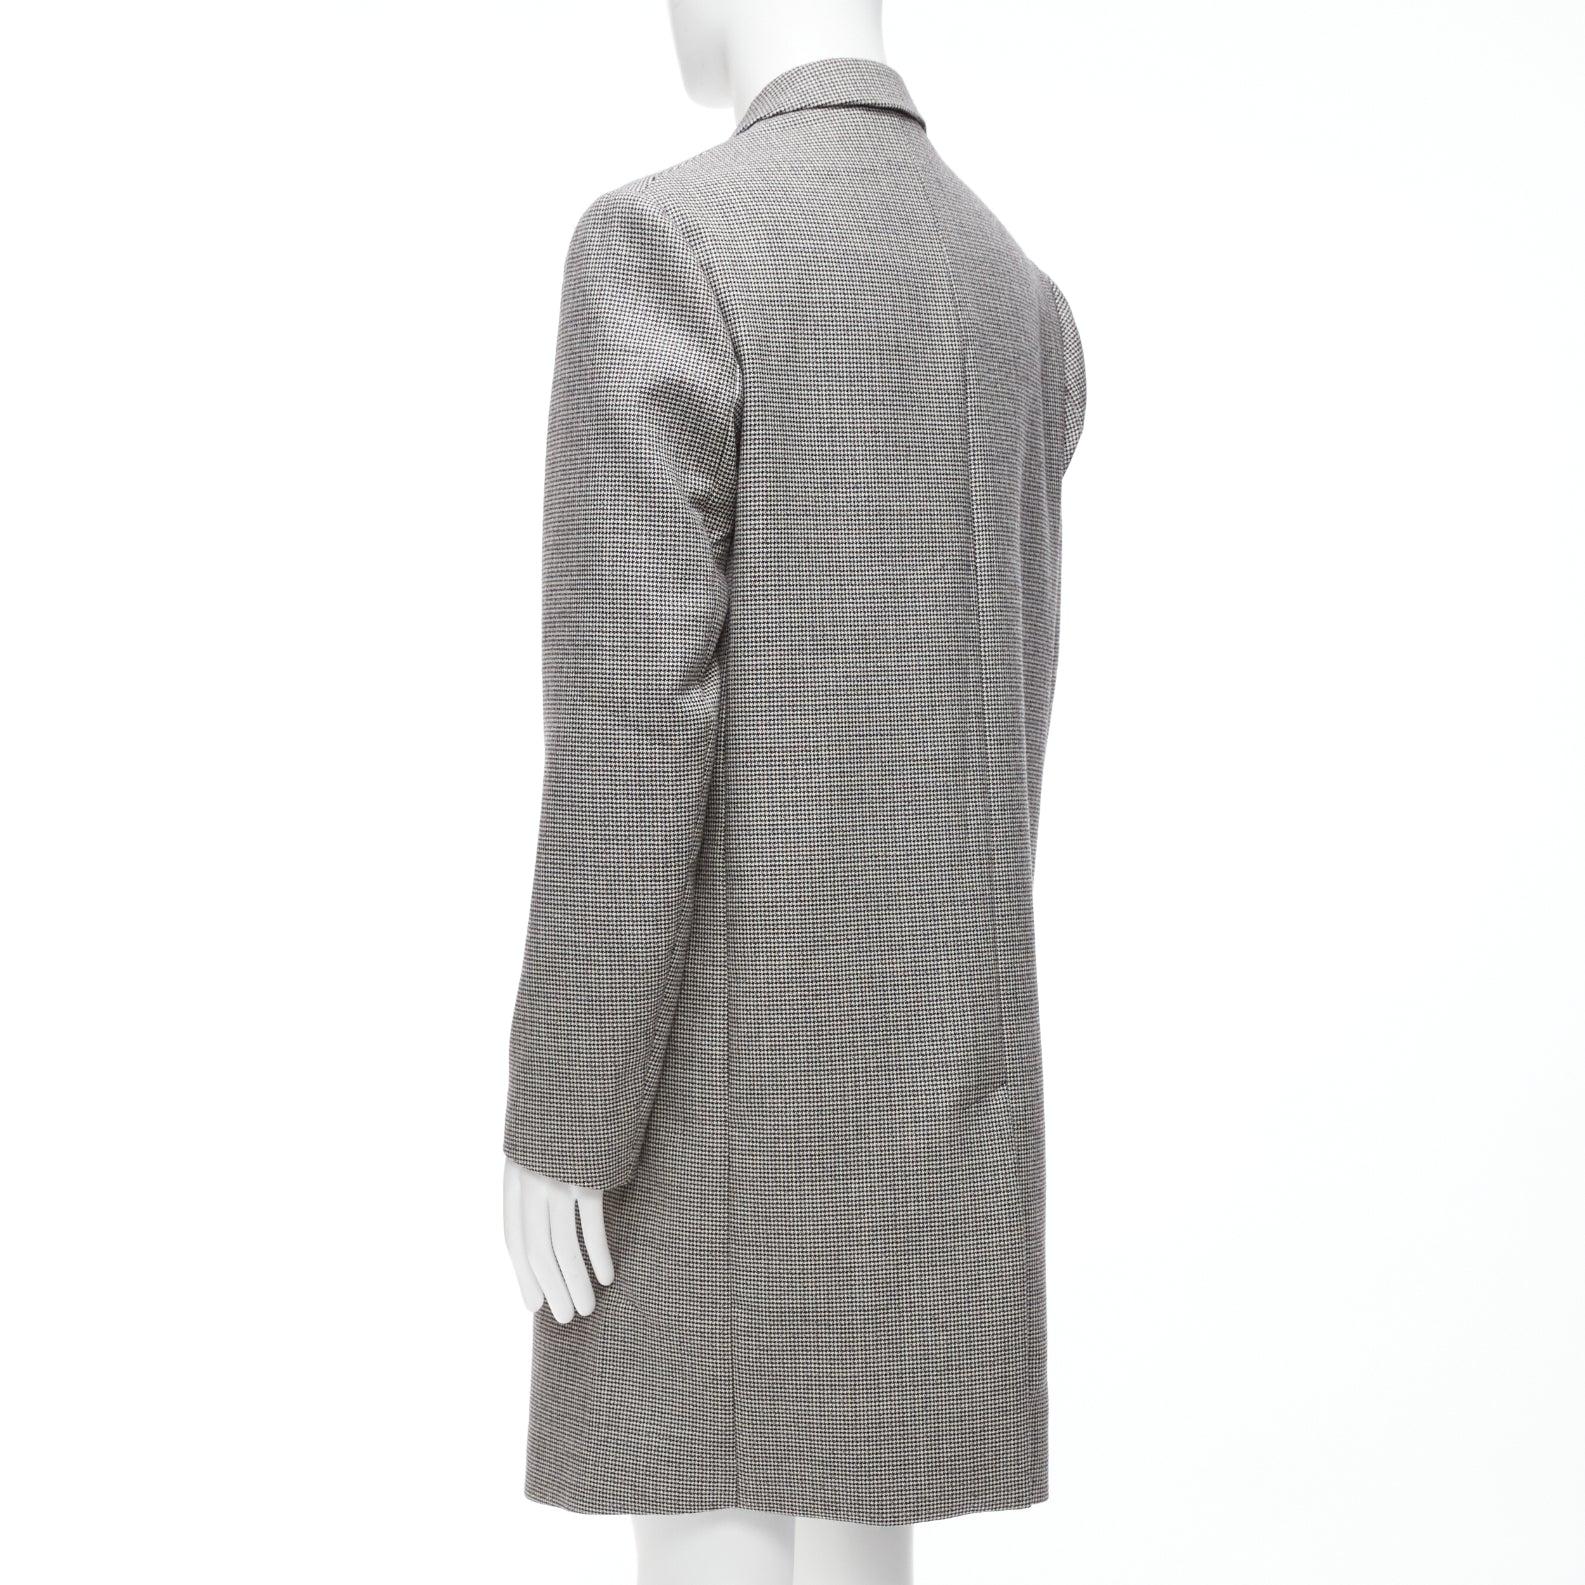 MARNI grey houndstooth wool blend invisible placket longline coat IT48 M For Sale 3